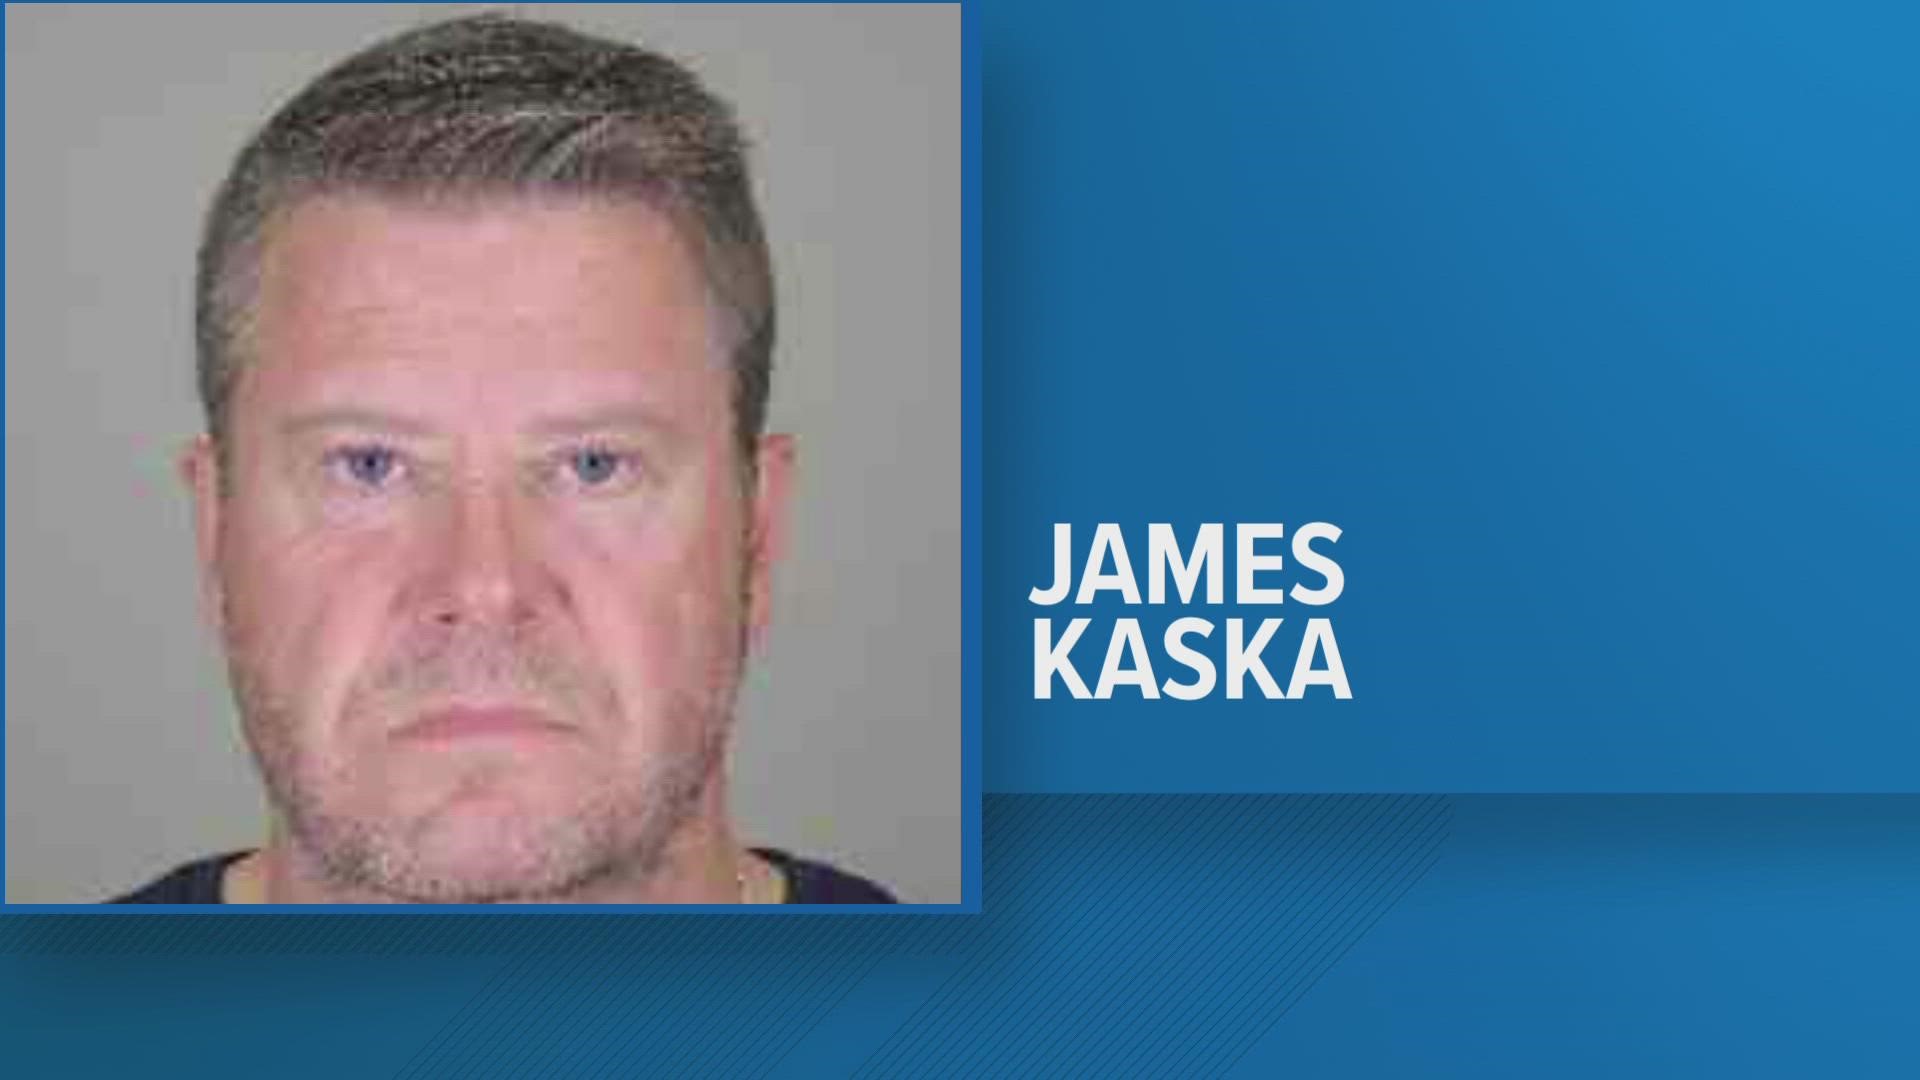 James R. Kaska, 50, of Hamburg, was charged with one count of Menacing in the Second Degree among other charges.